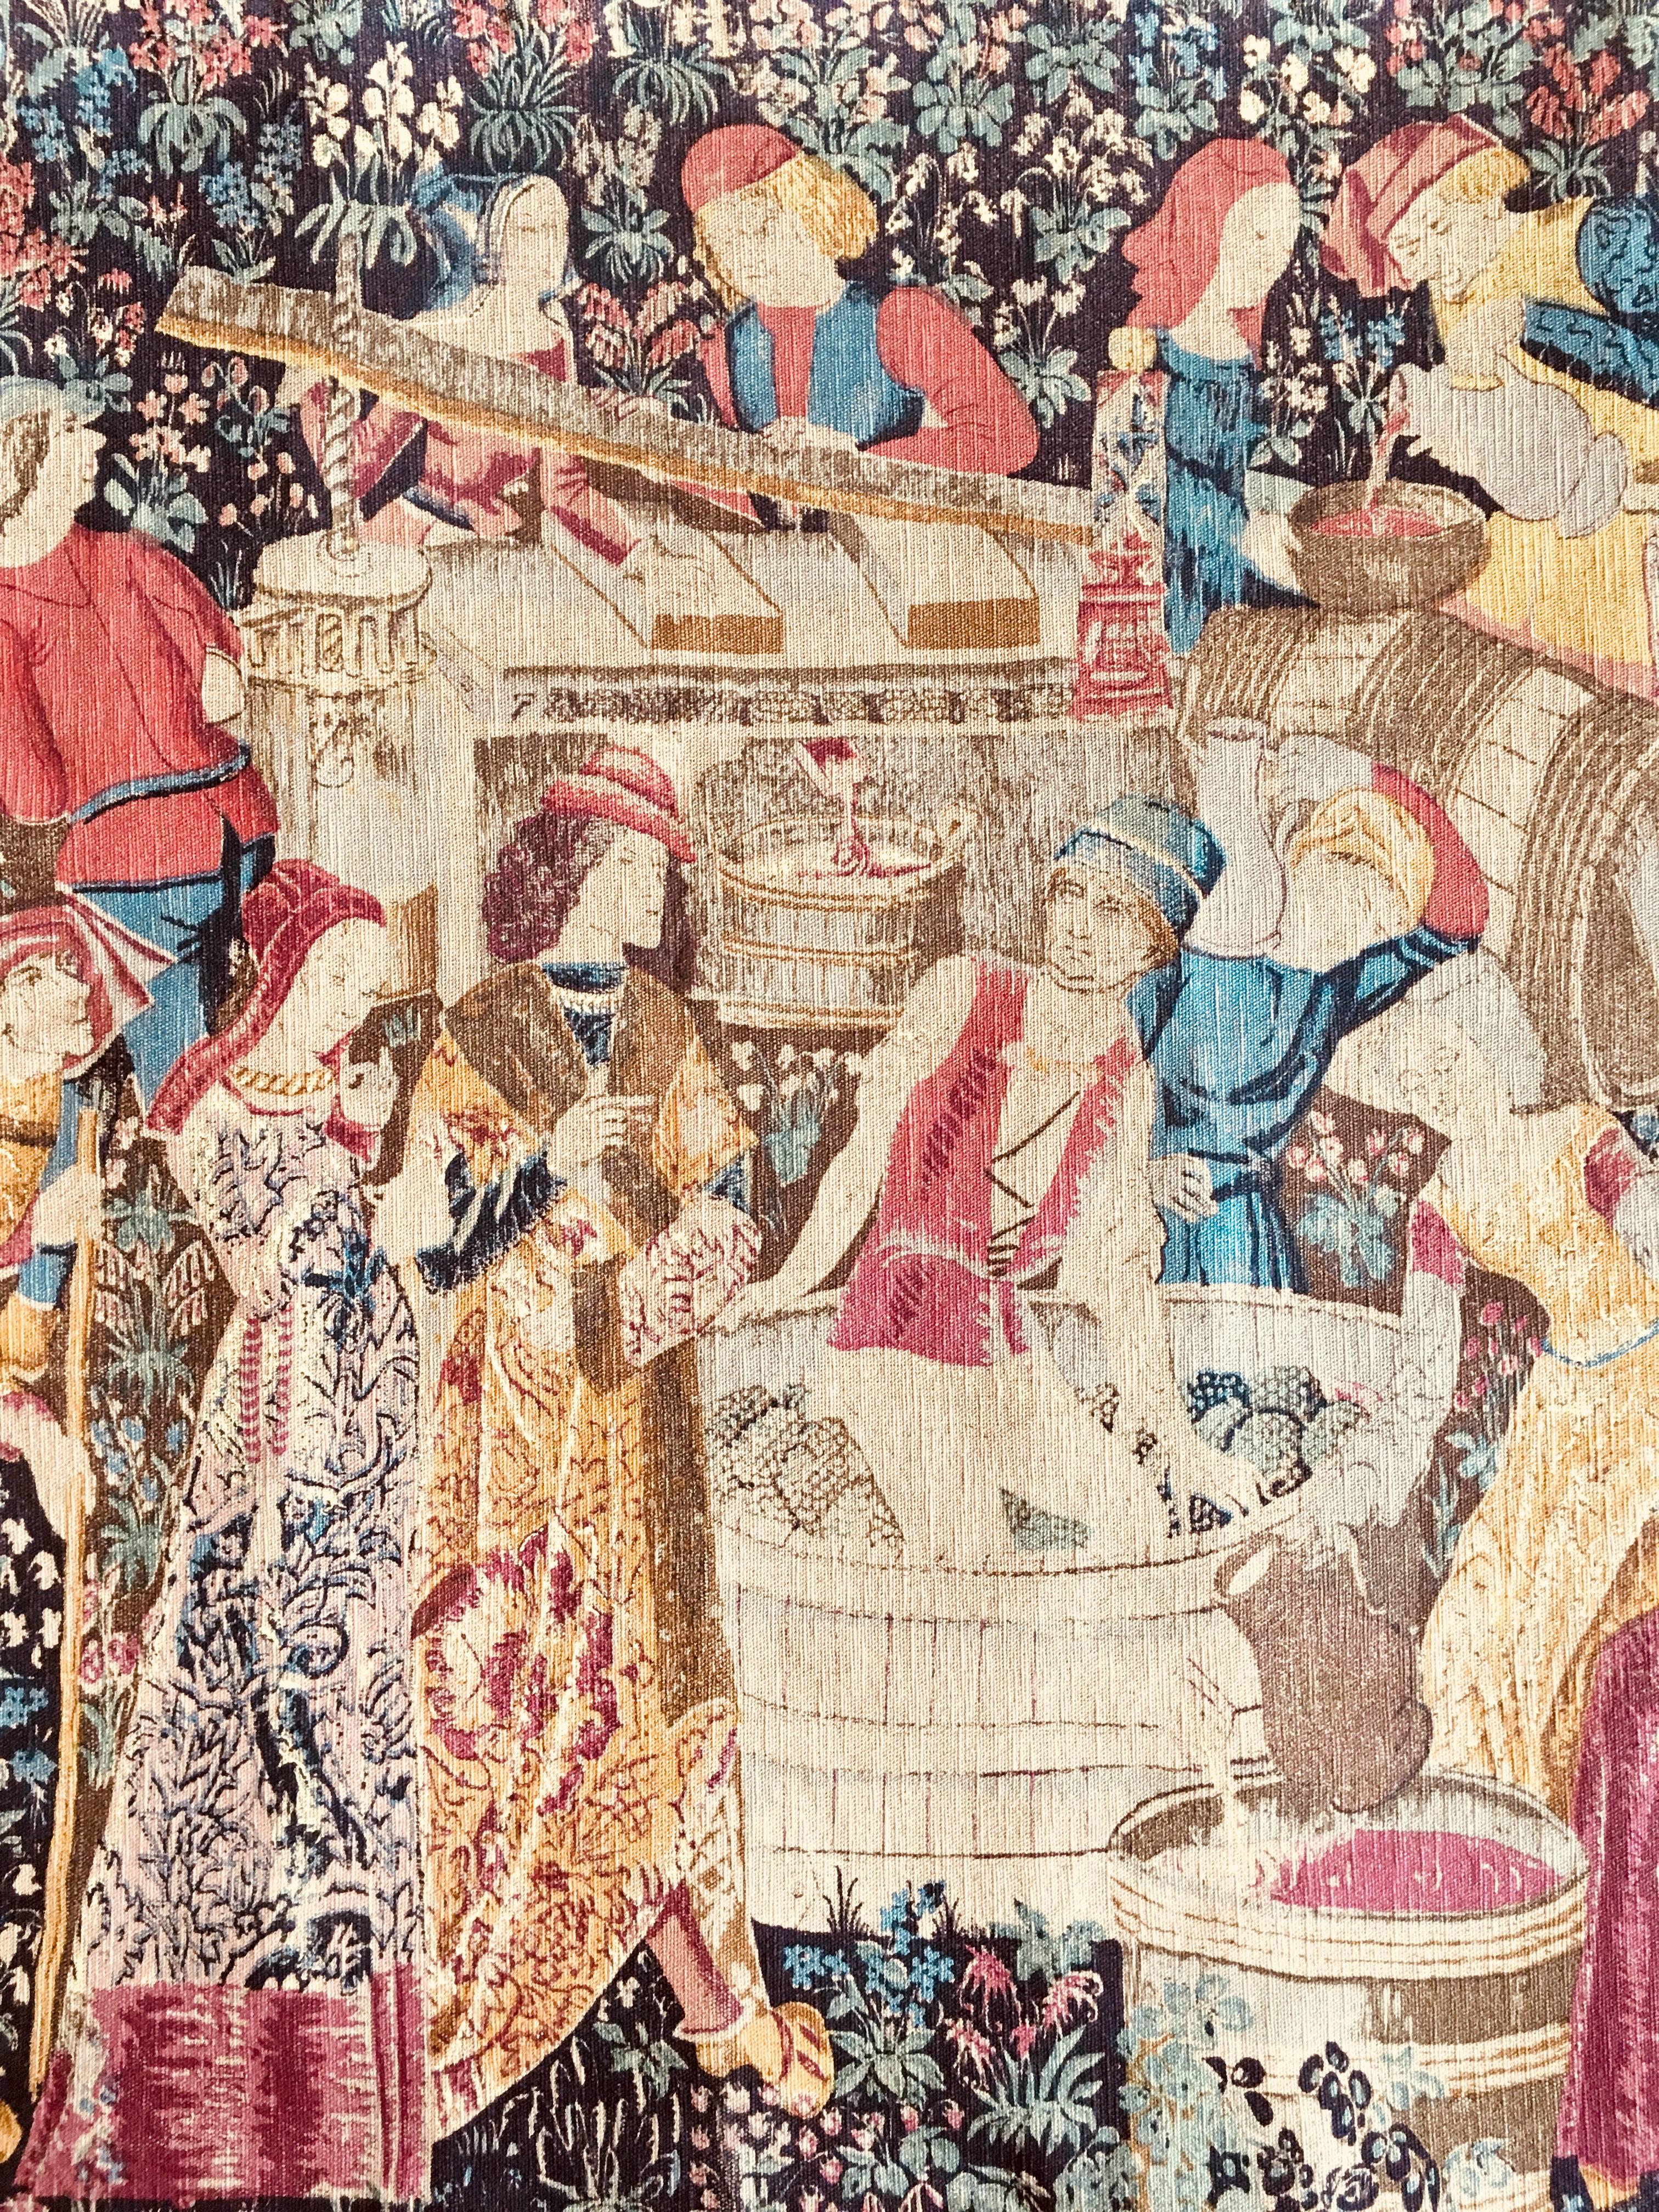 Large tapestry from the Artis flora workshop from the beginning of the 20th century based on one from the 15th century called 